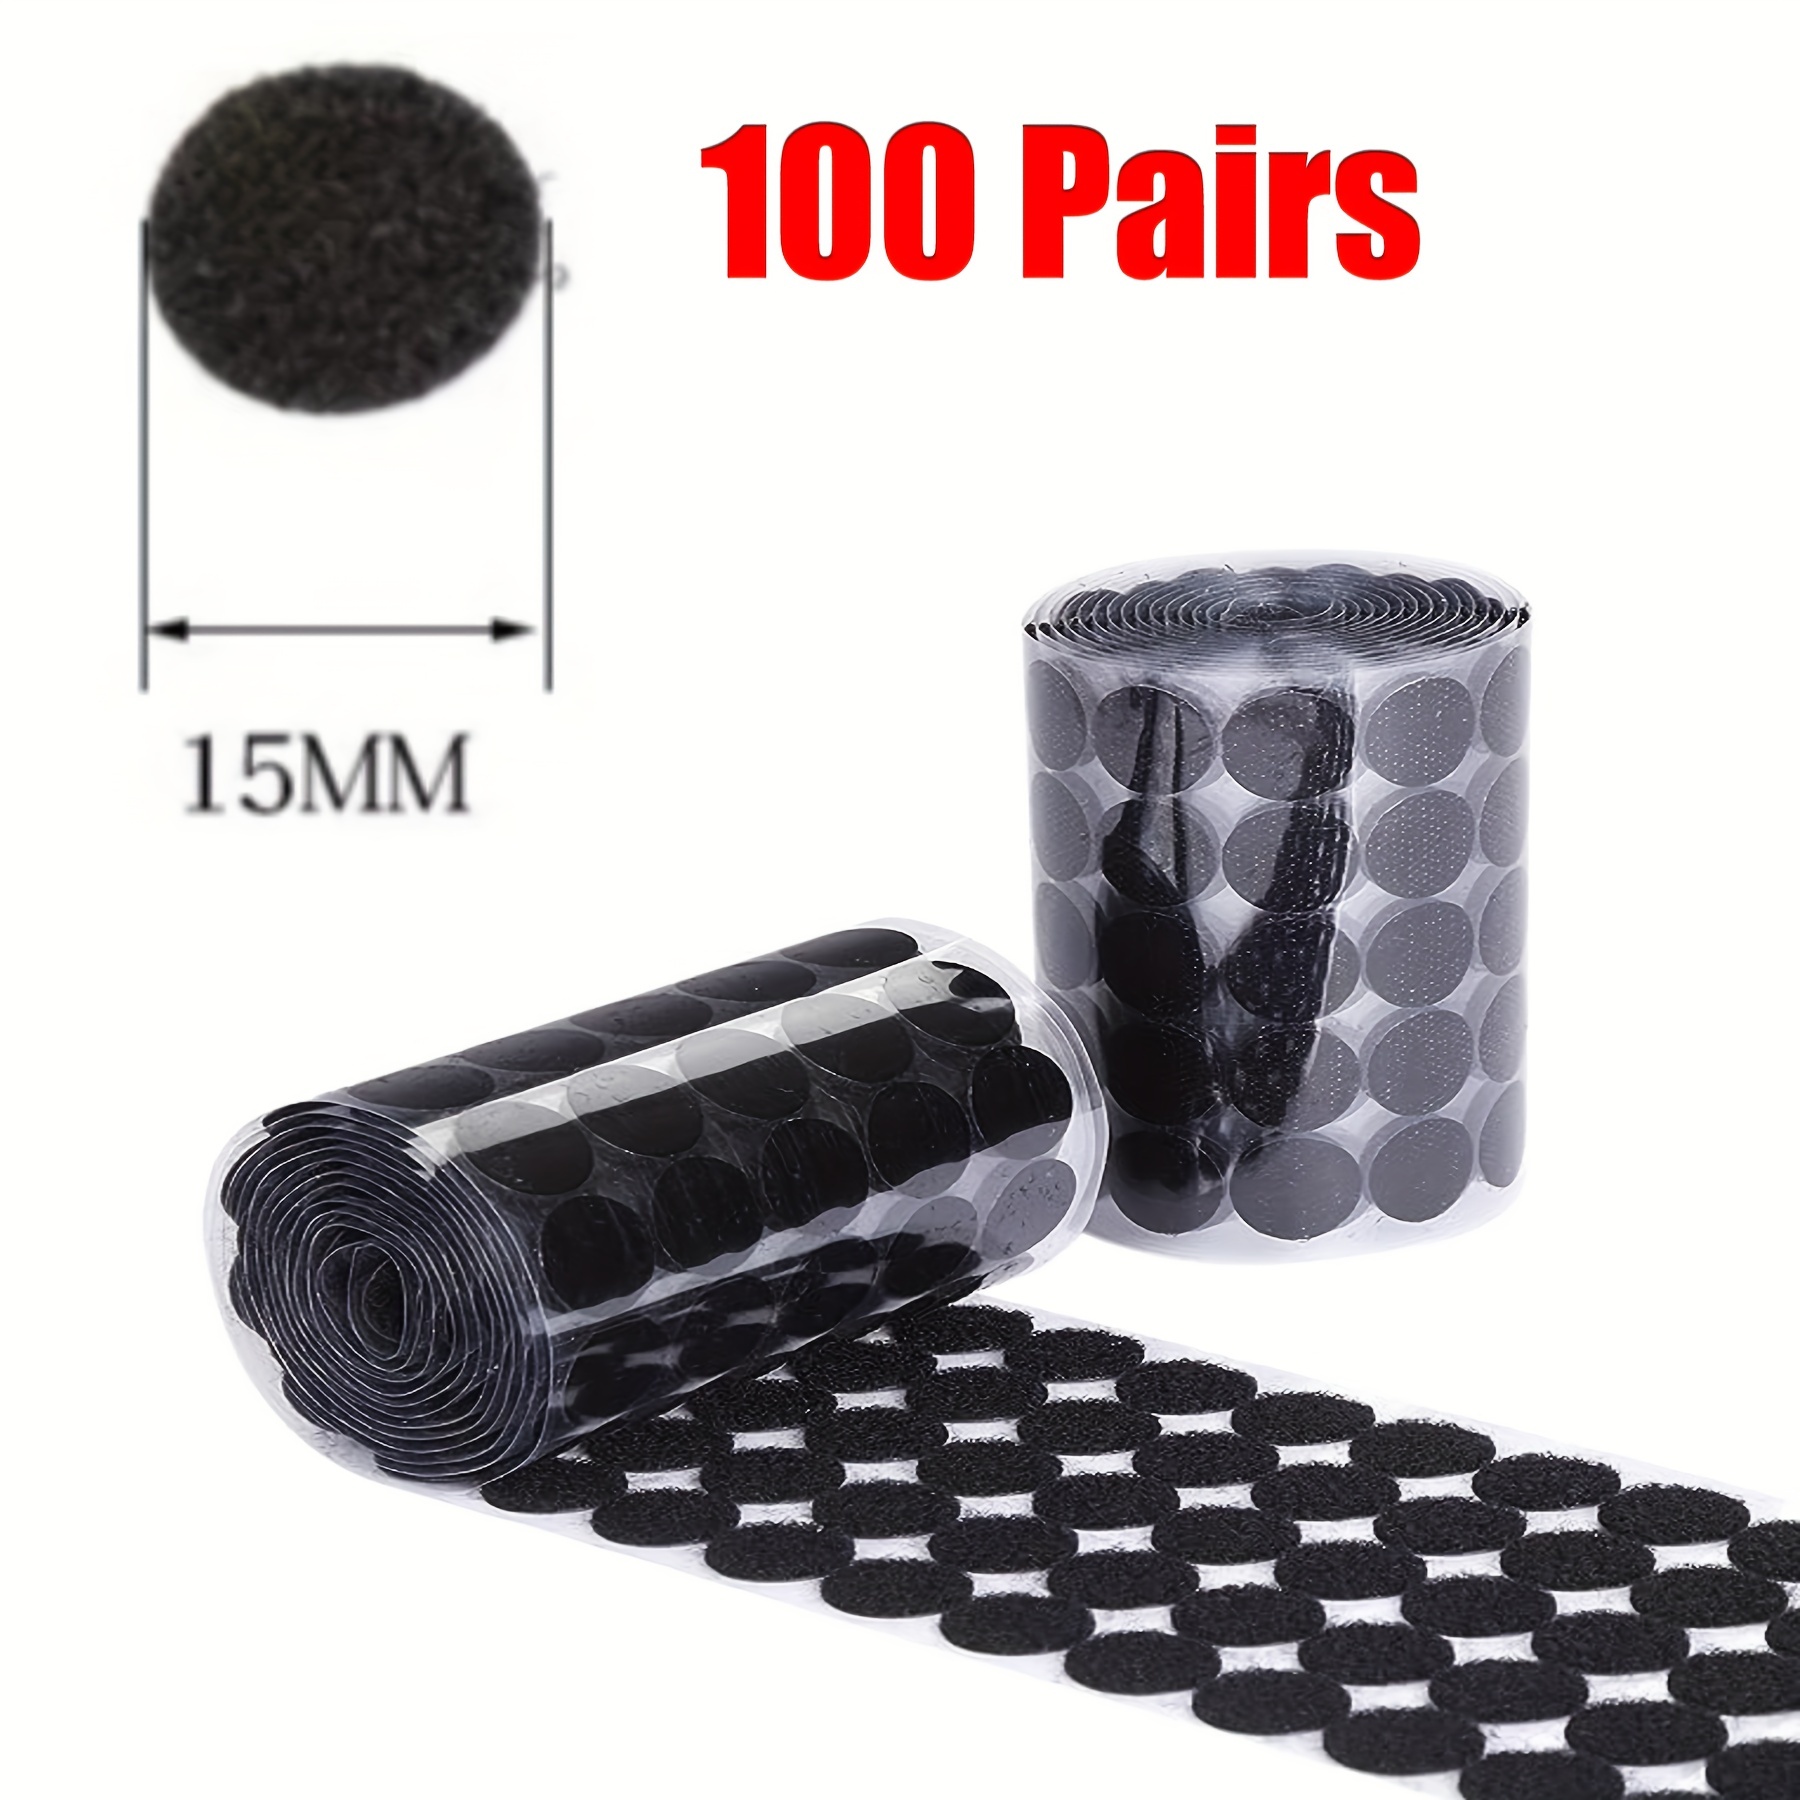 Self Adhesive Dots - 1200pcs (600 Pairs) 0.59 Diameter Sticky Back Hook and  Loop Coins for School Office Home Mounting Arts & Crafts